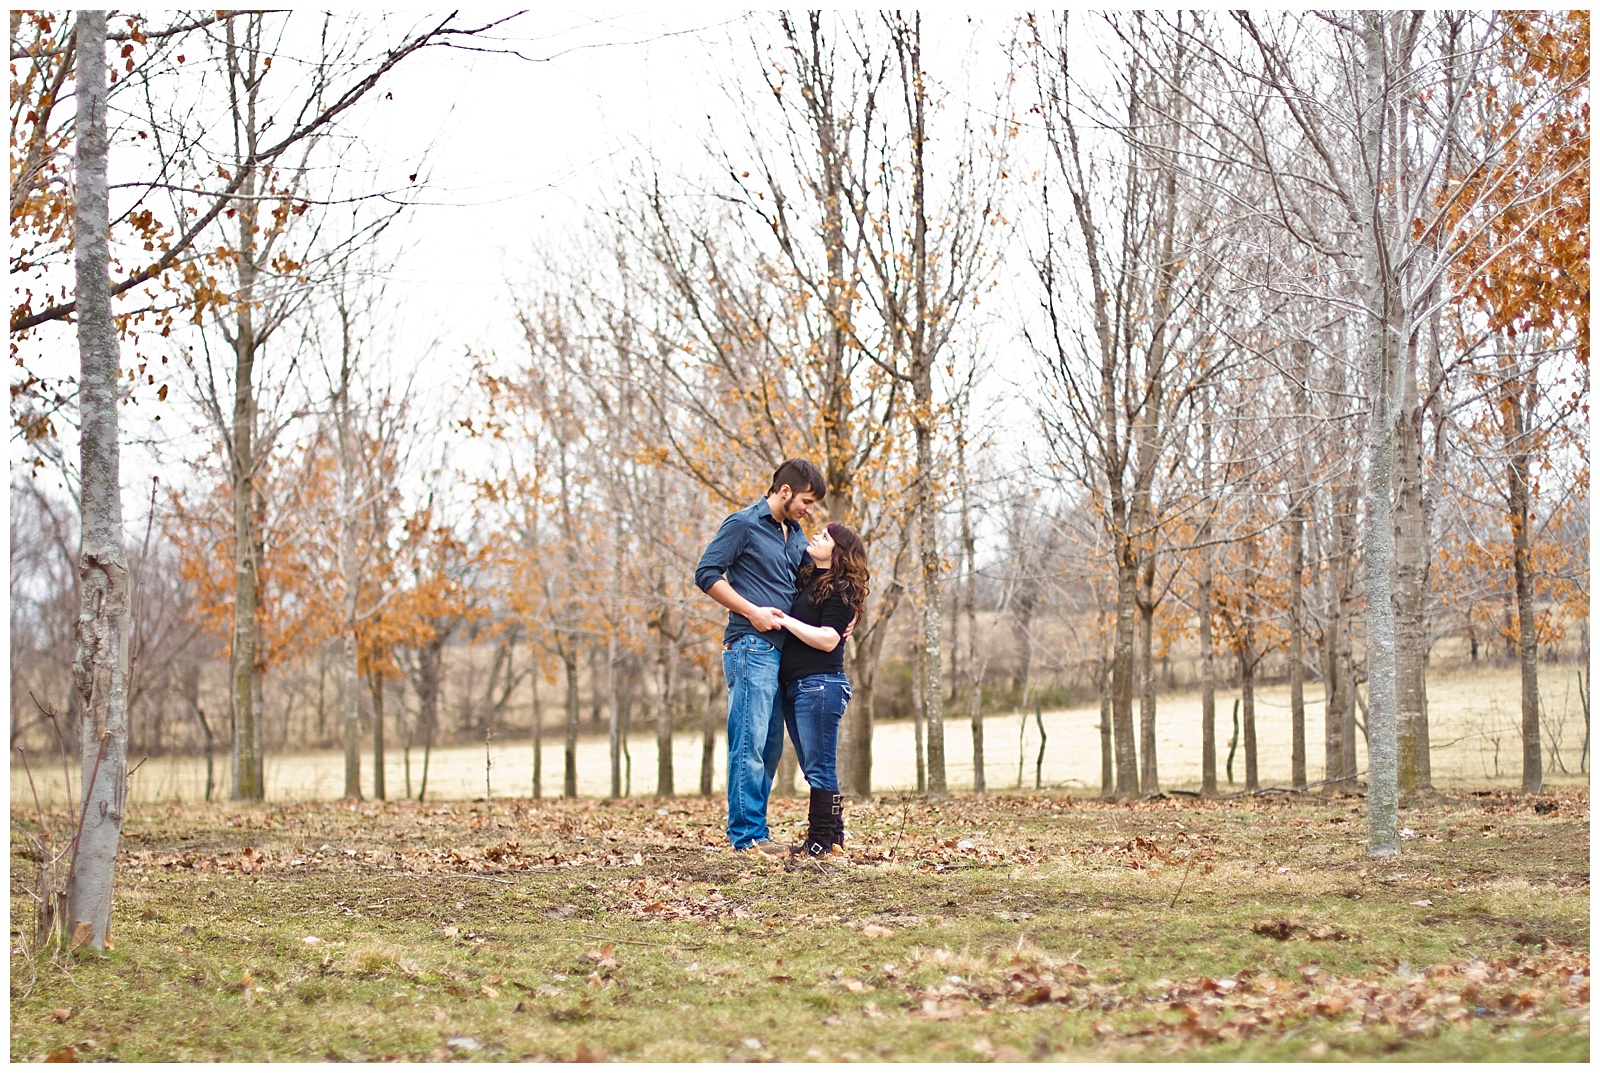 An engagement session in Independence, Missouri.